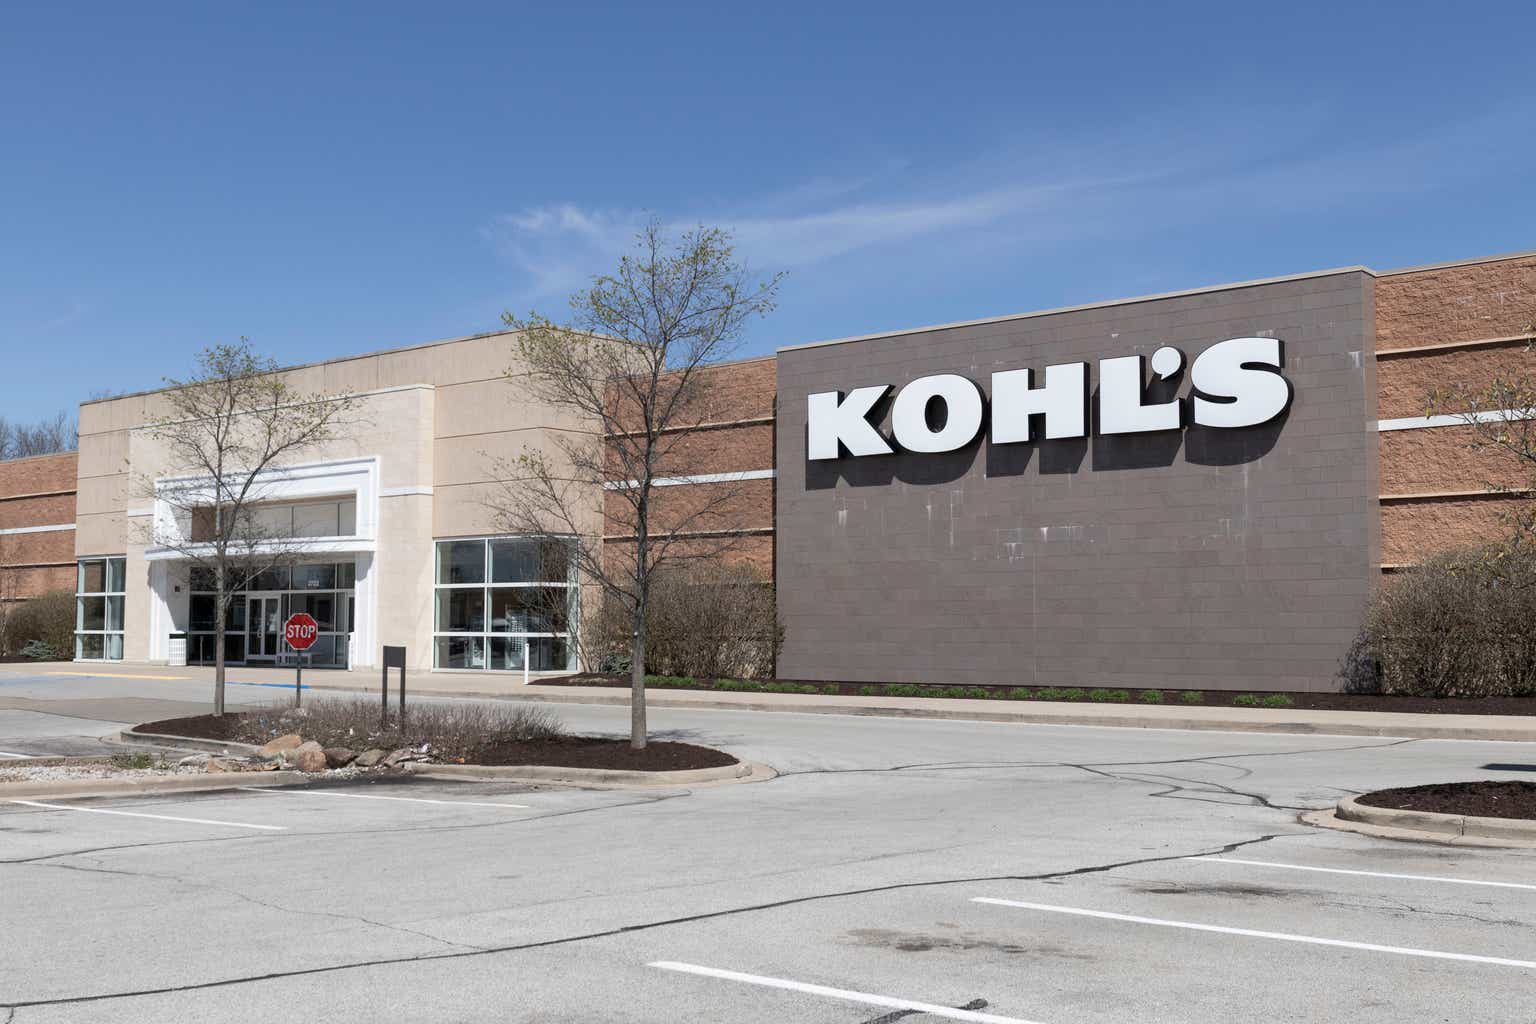 Kohl's Deal Results: What I Learned & How It Turned Out – OUT AND OUT